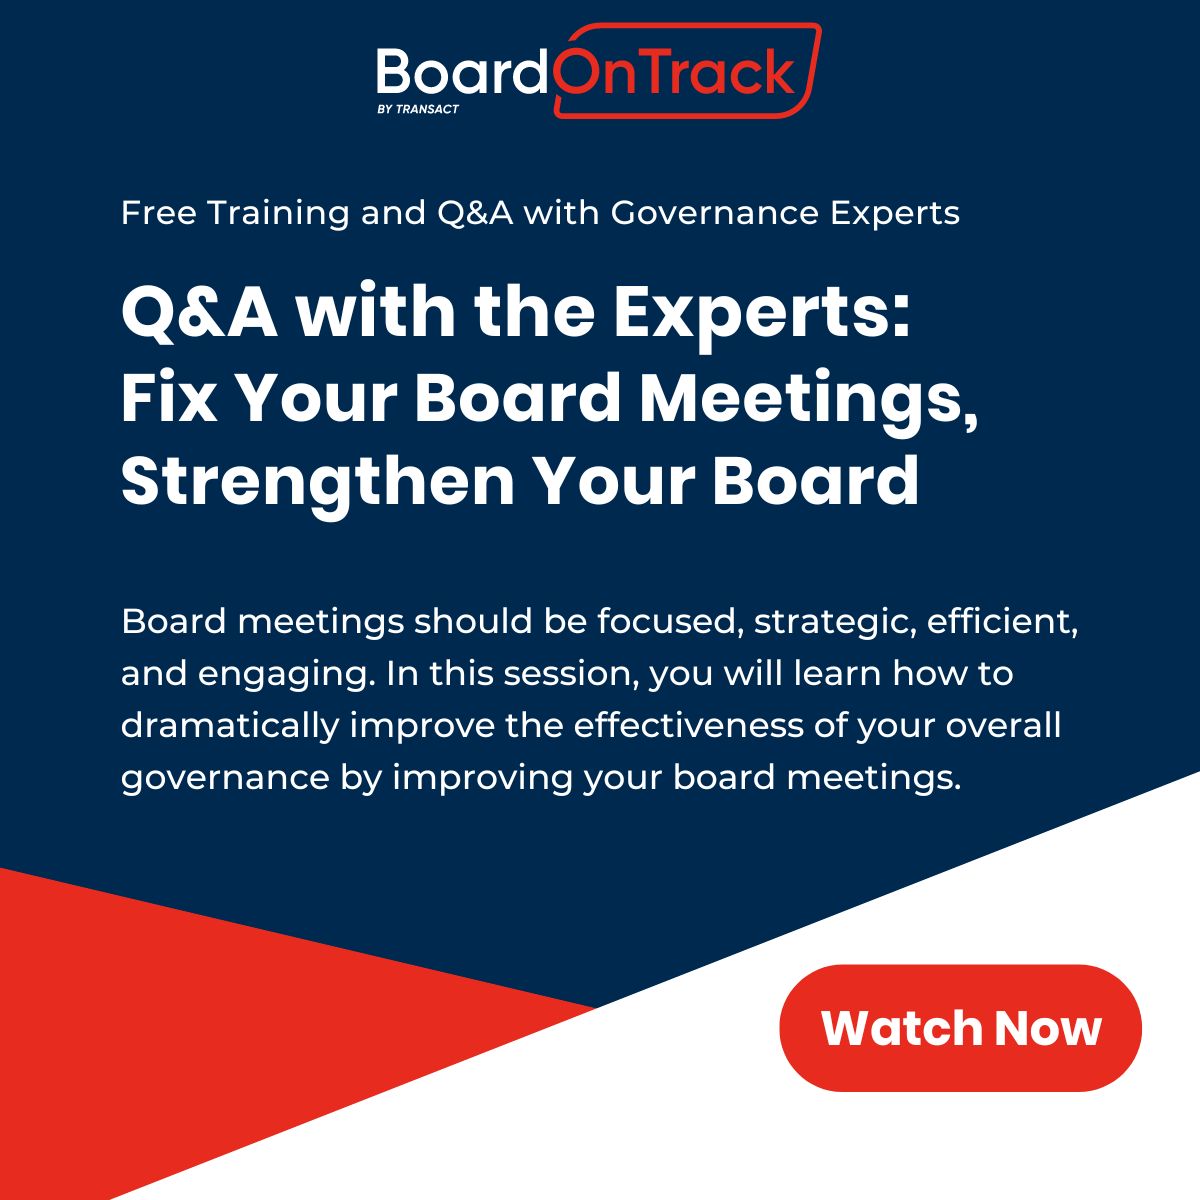 fix-your-board-meetings-strengthen-your-board